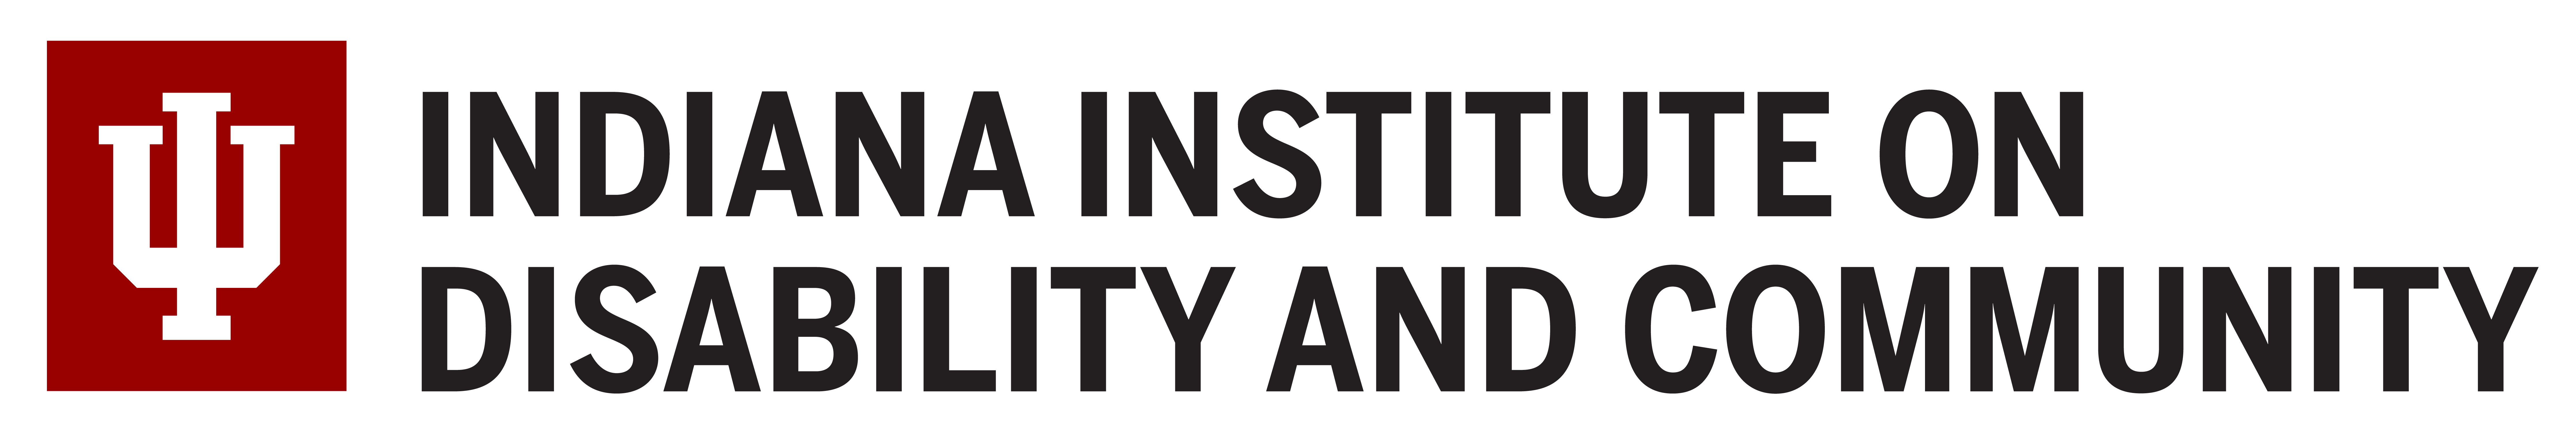 Indiana Institute on Disability and Community logo with the IU trident on the left